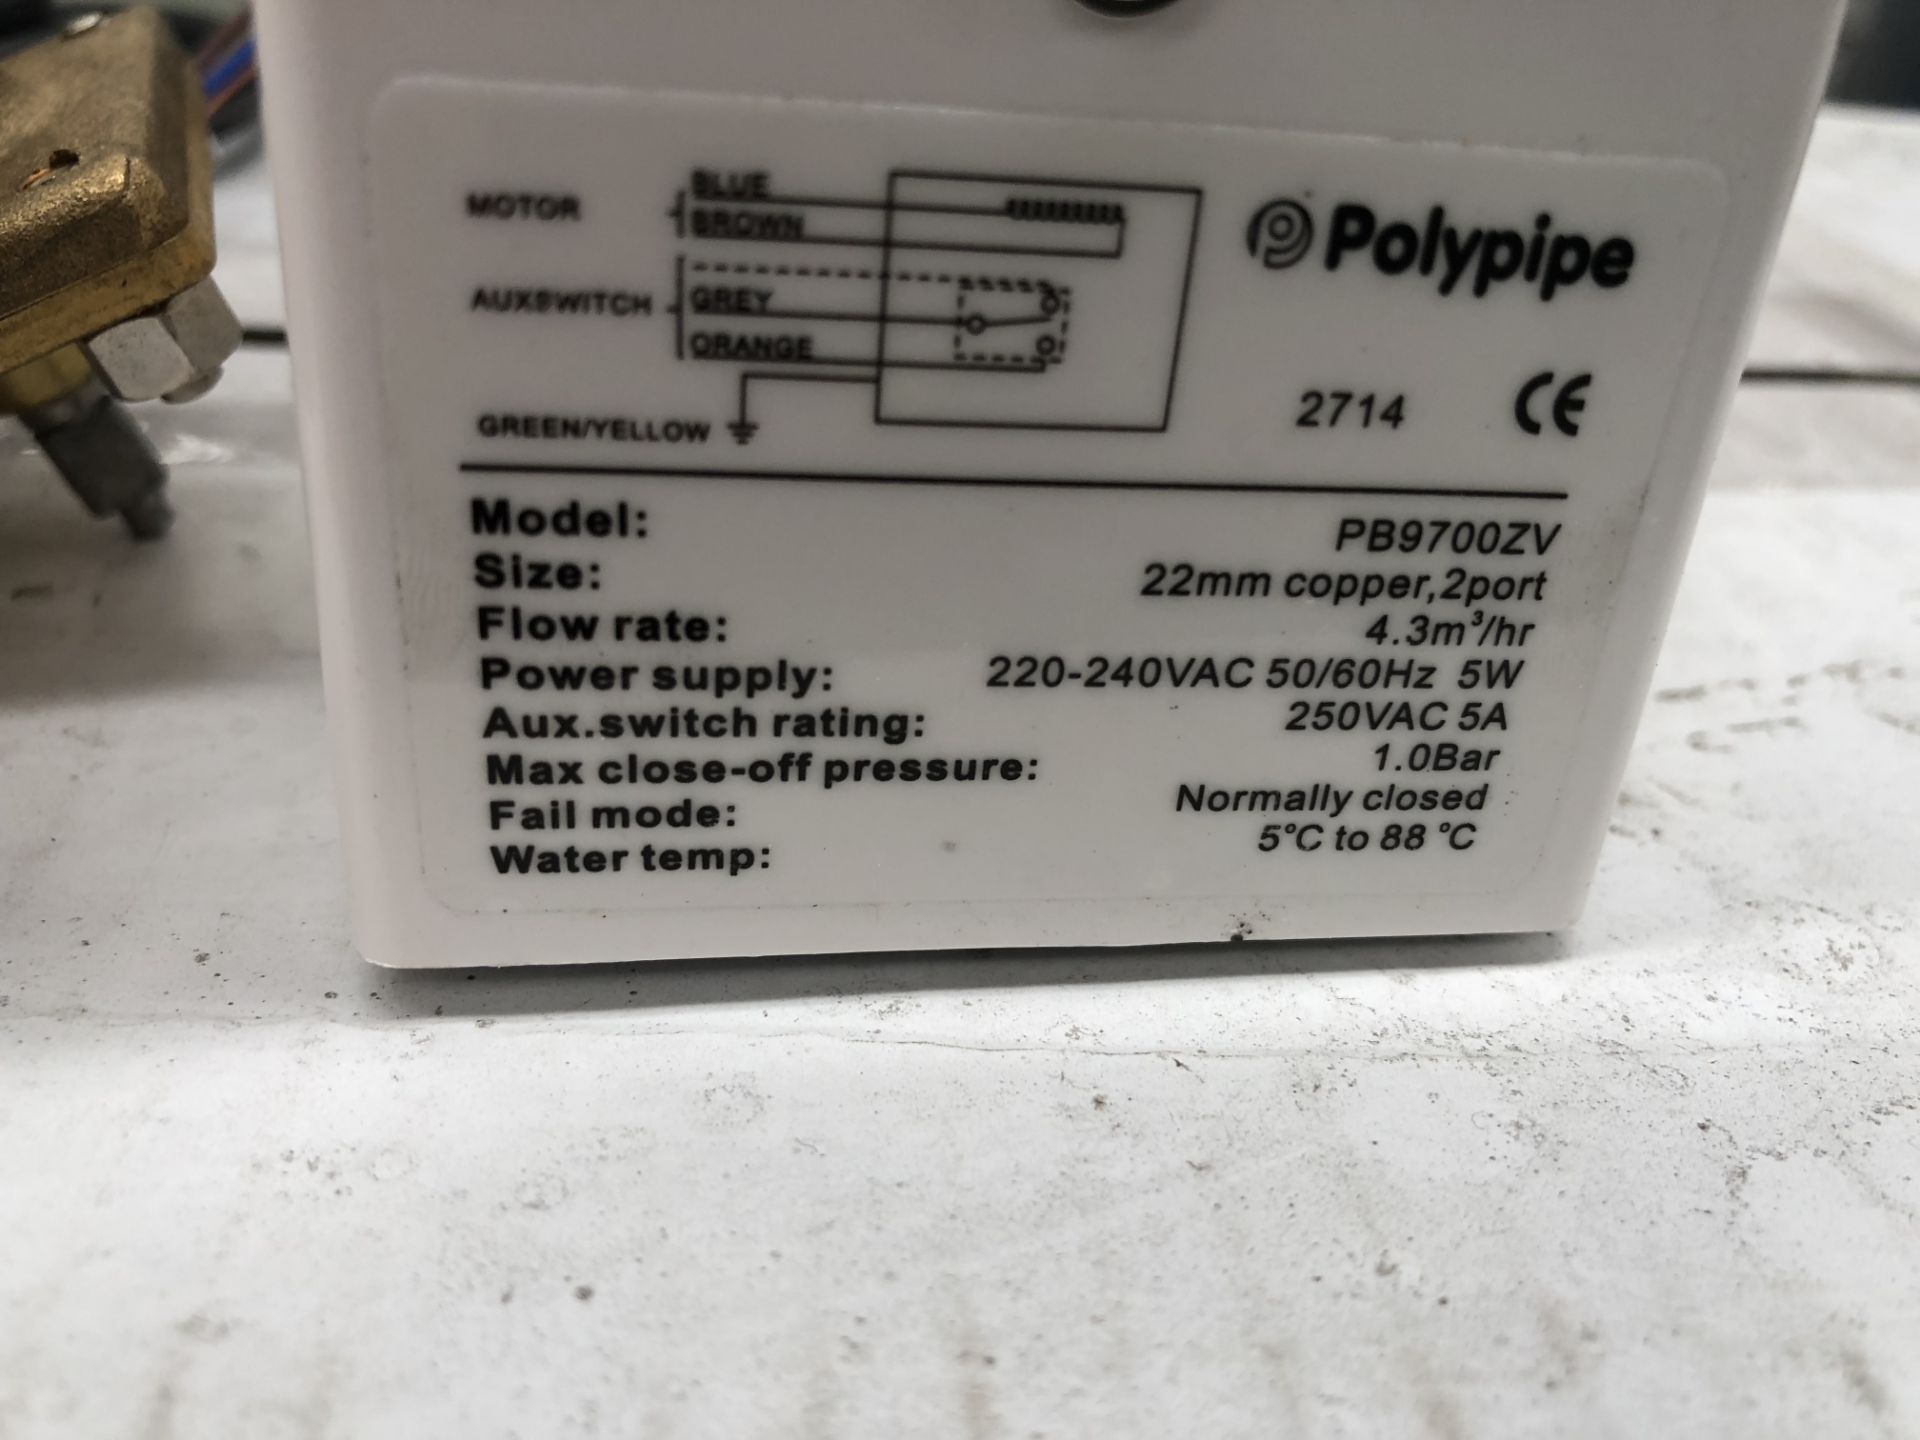 LOT UPDATED 25 boxes Polypipe PB9700ZV motorised Zone Valves - Image 5 of 5